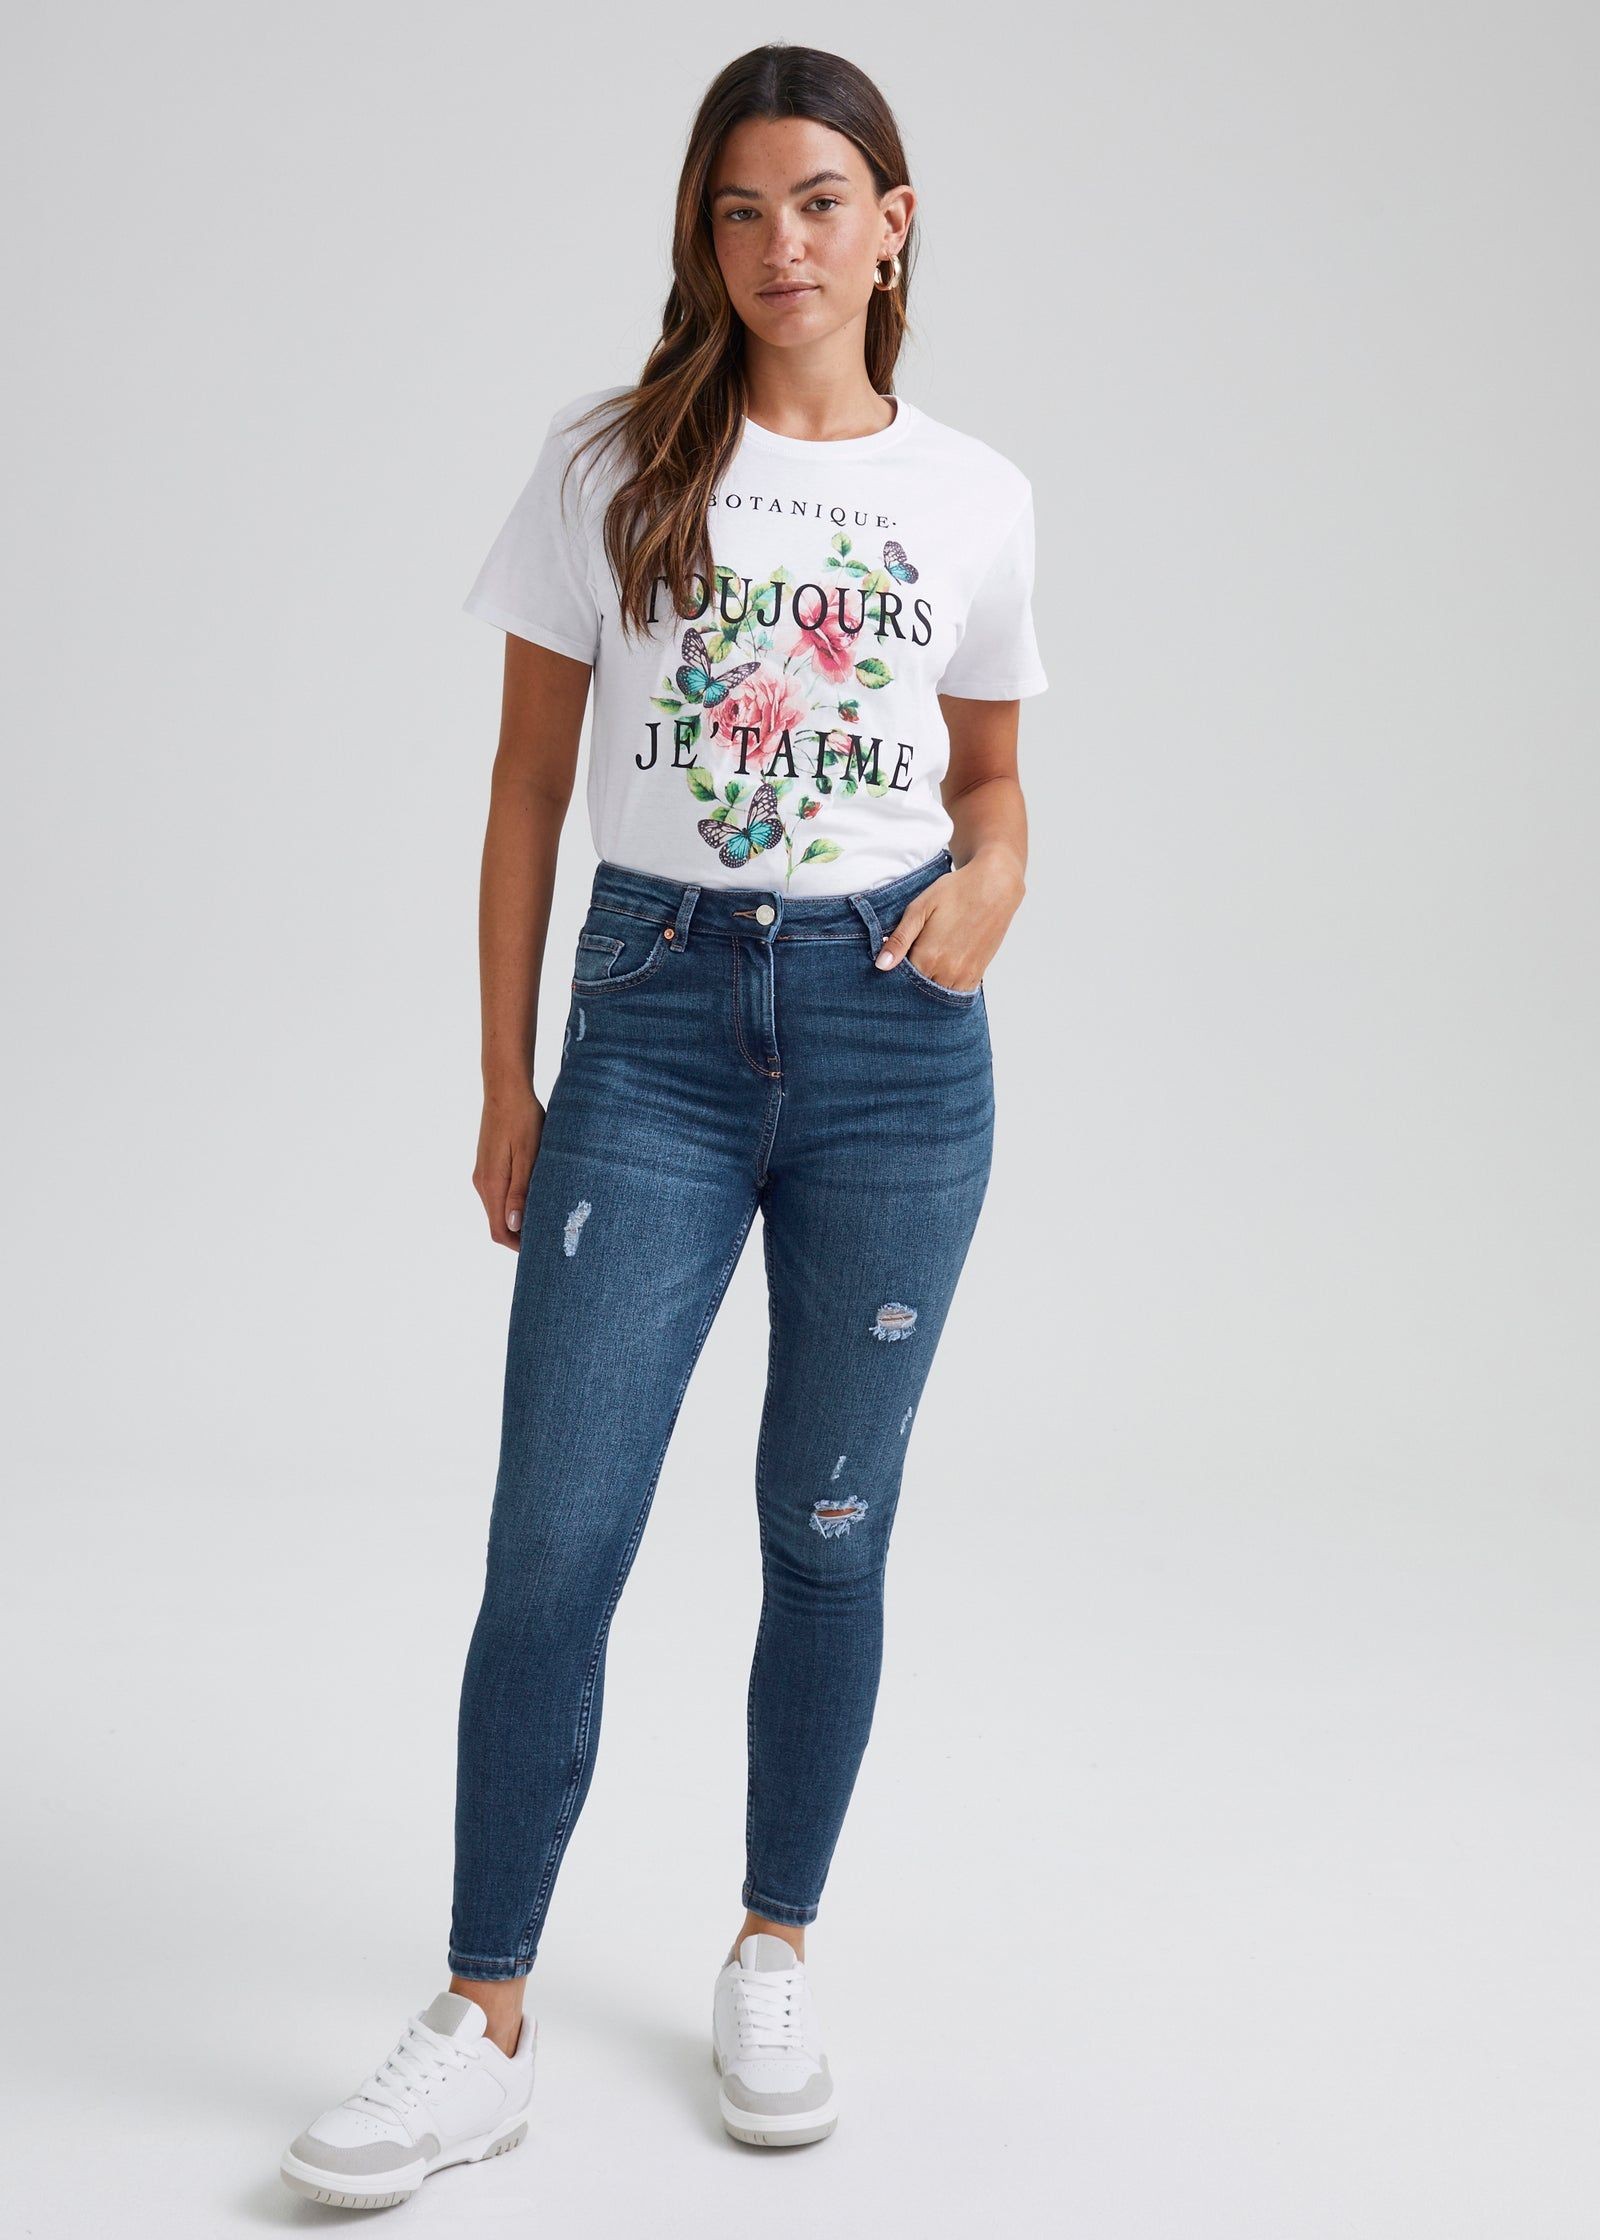 Jessie Black Ripped High Waisted Jeans - Matalan